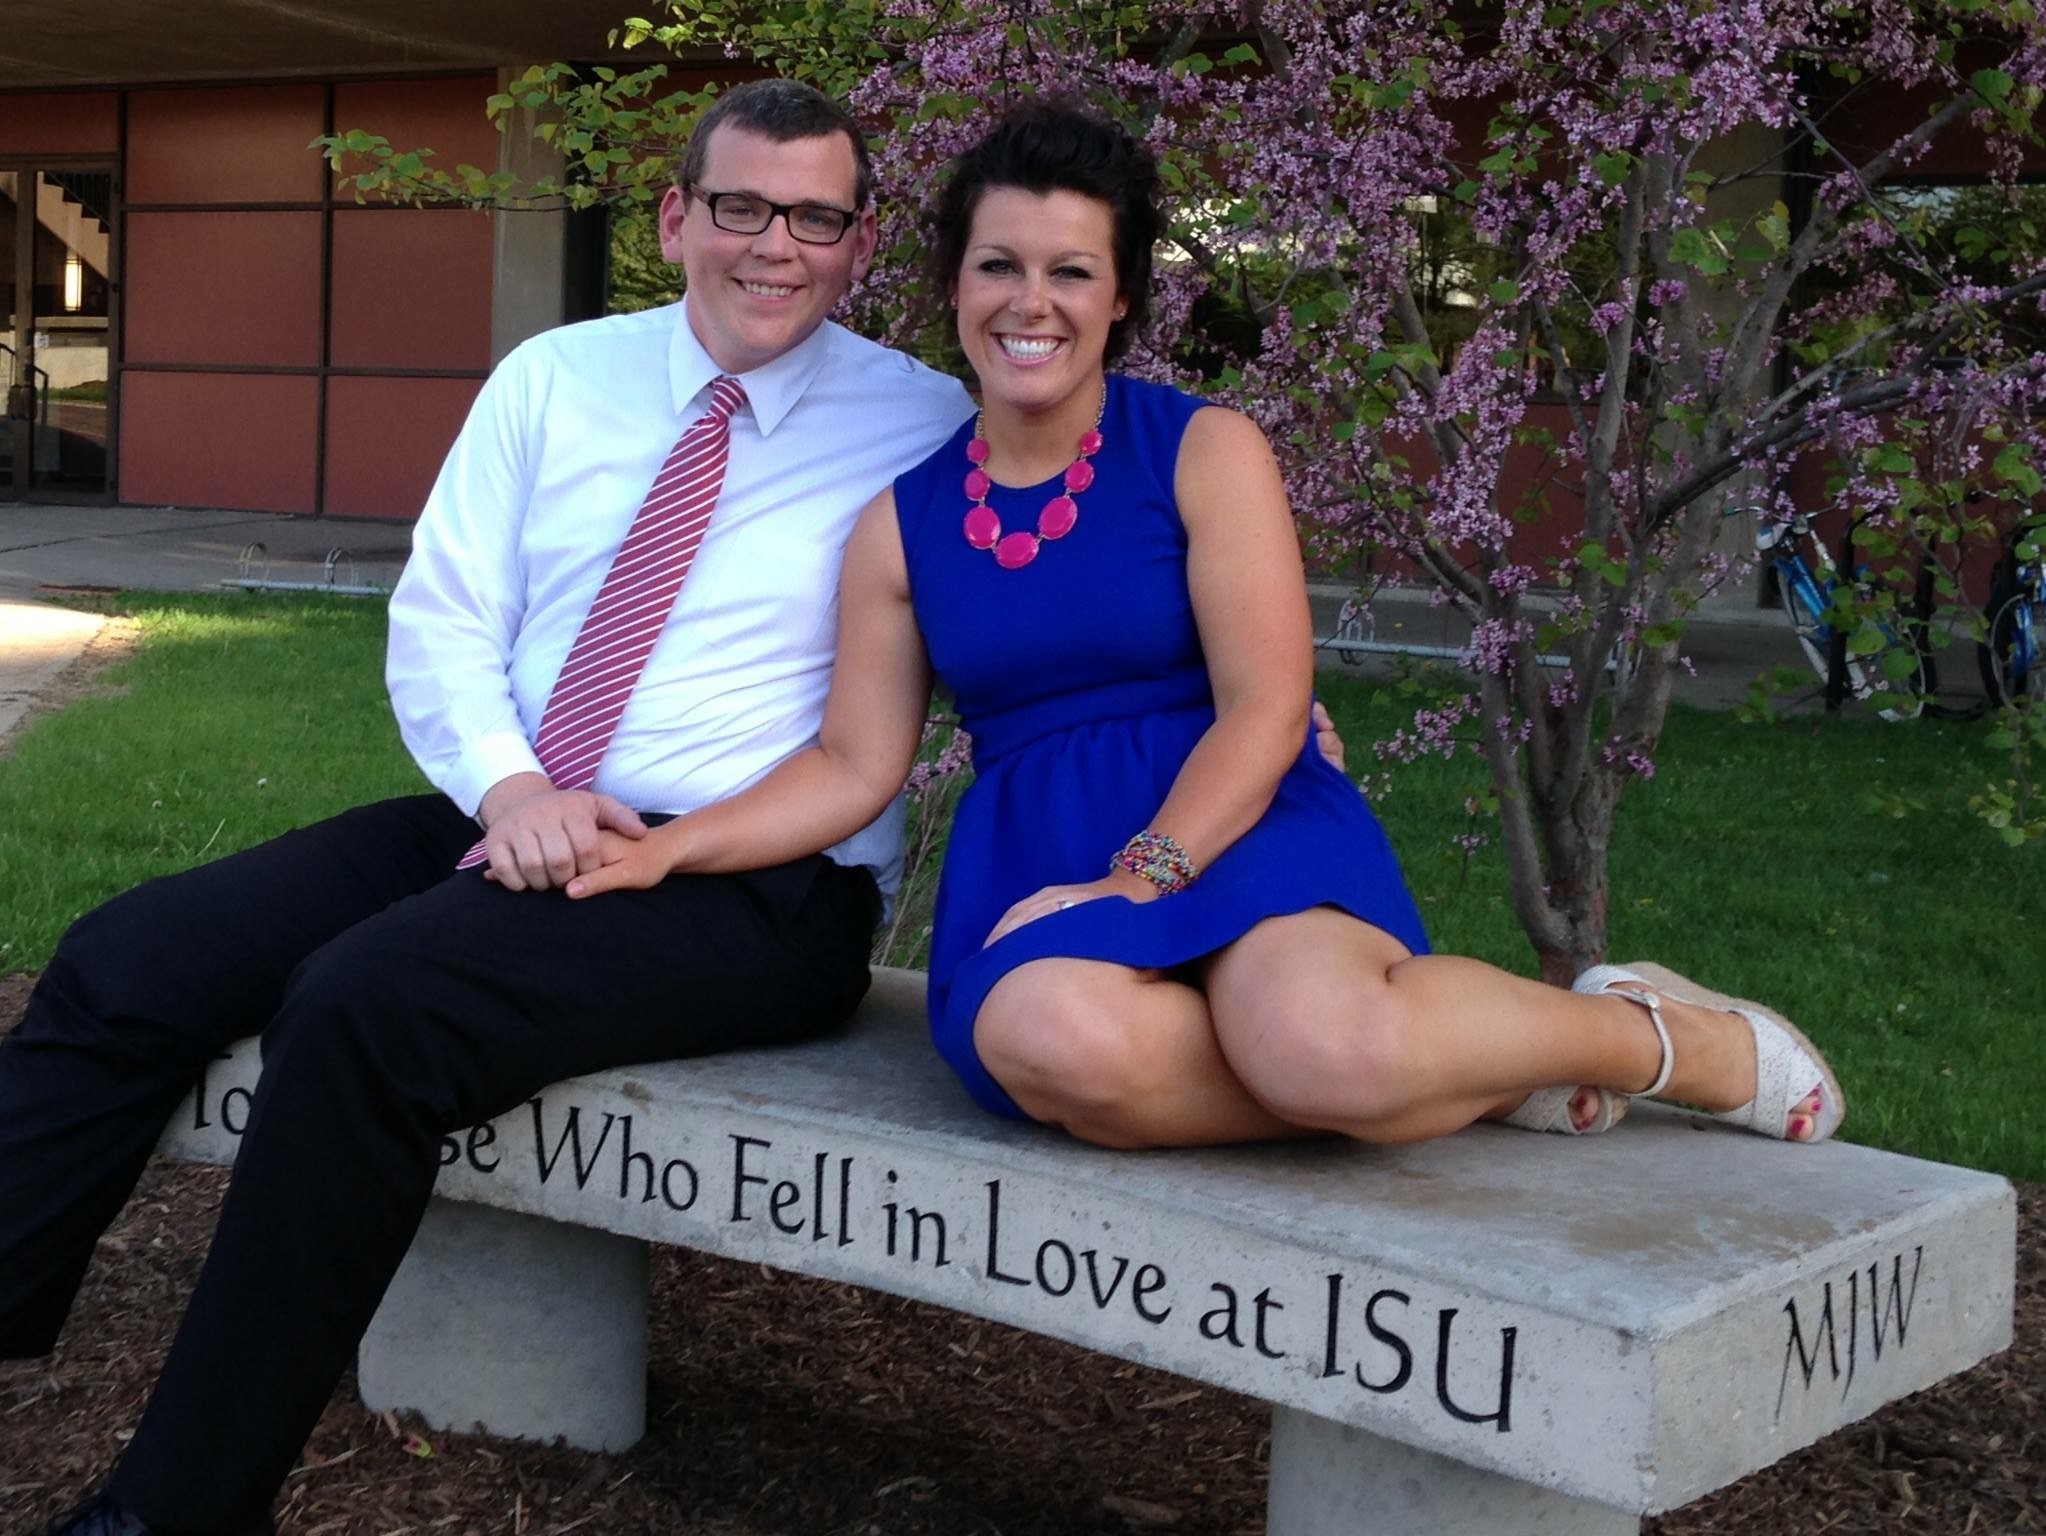 Patrick and Mary Kate O'Brien on the ISU love bench